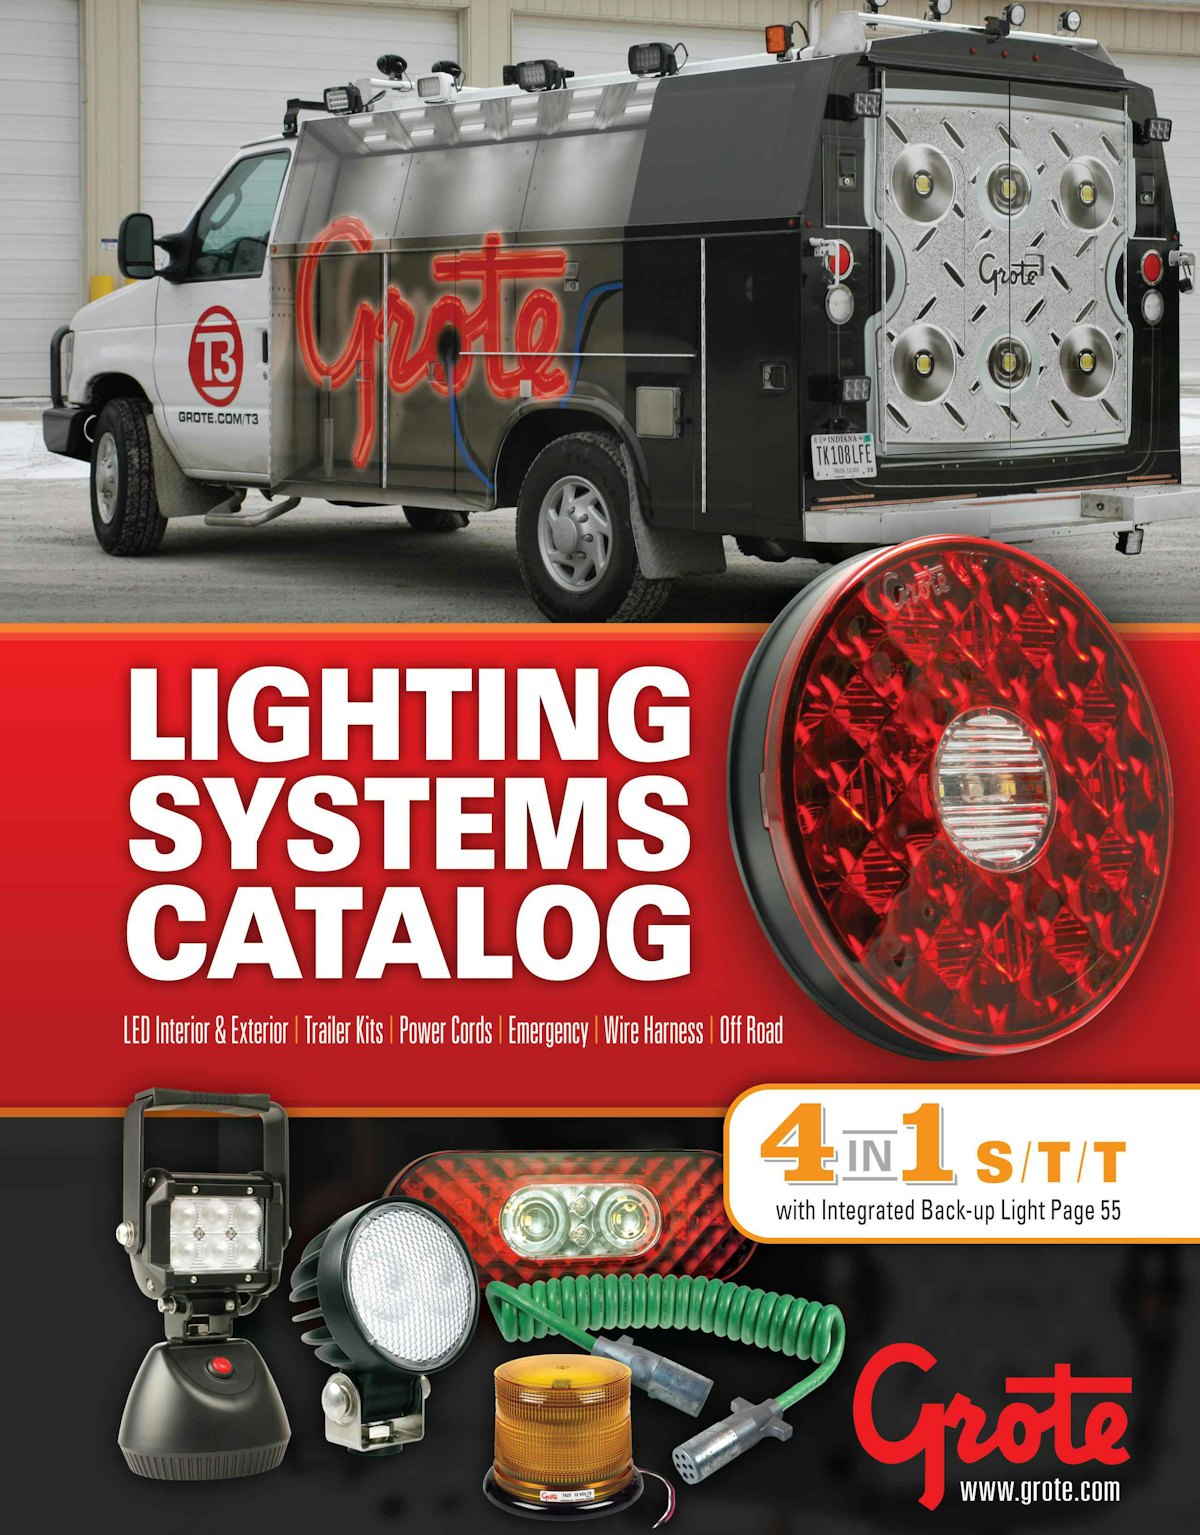 Grote LED Lighting Solutions